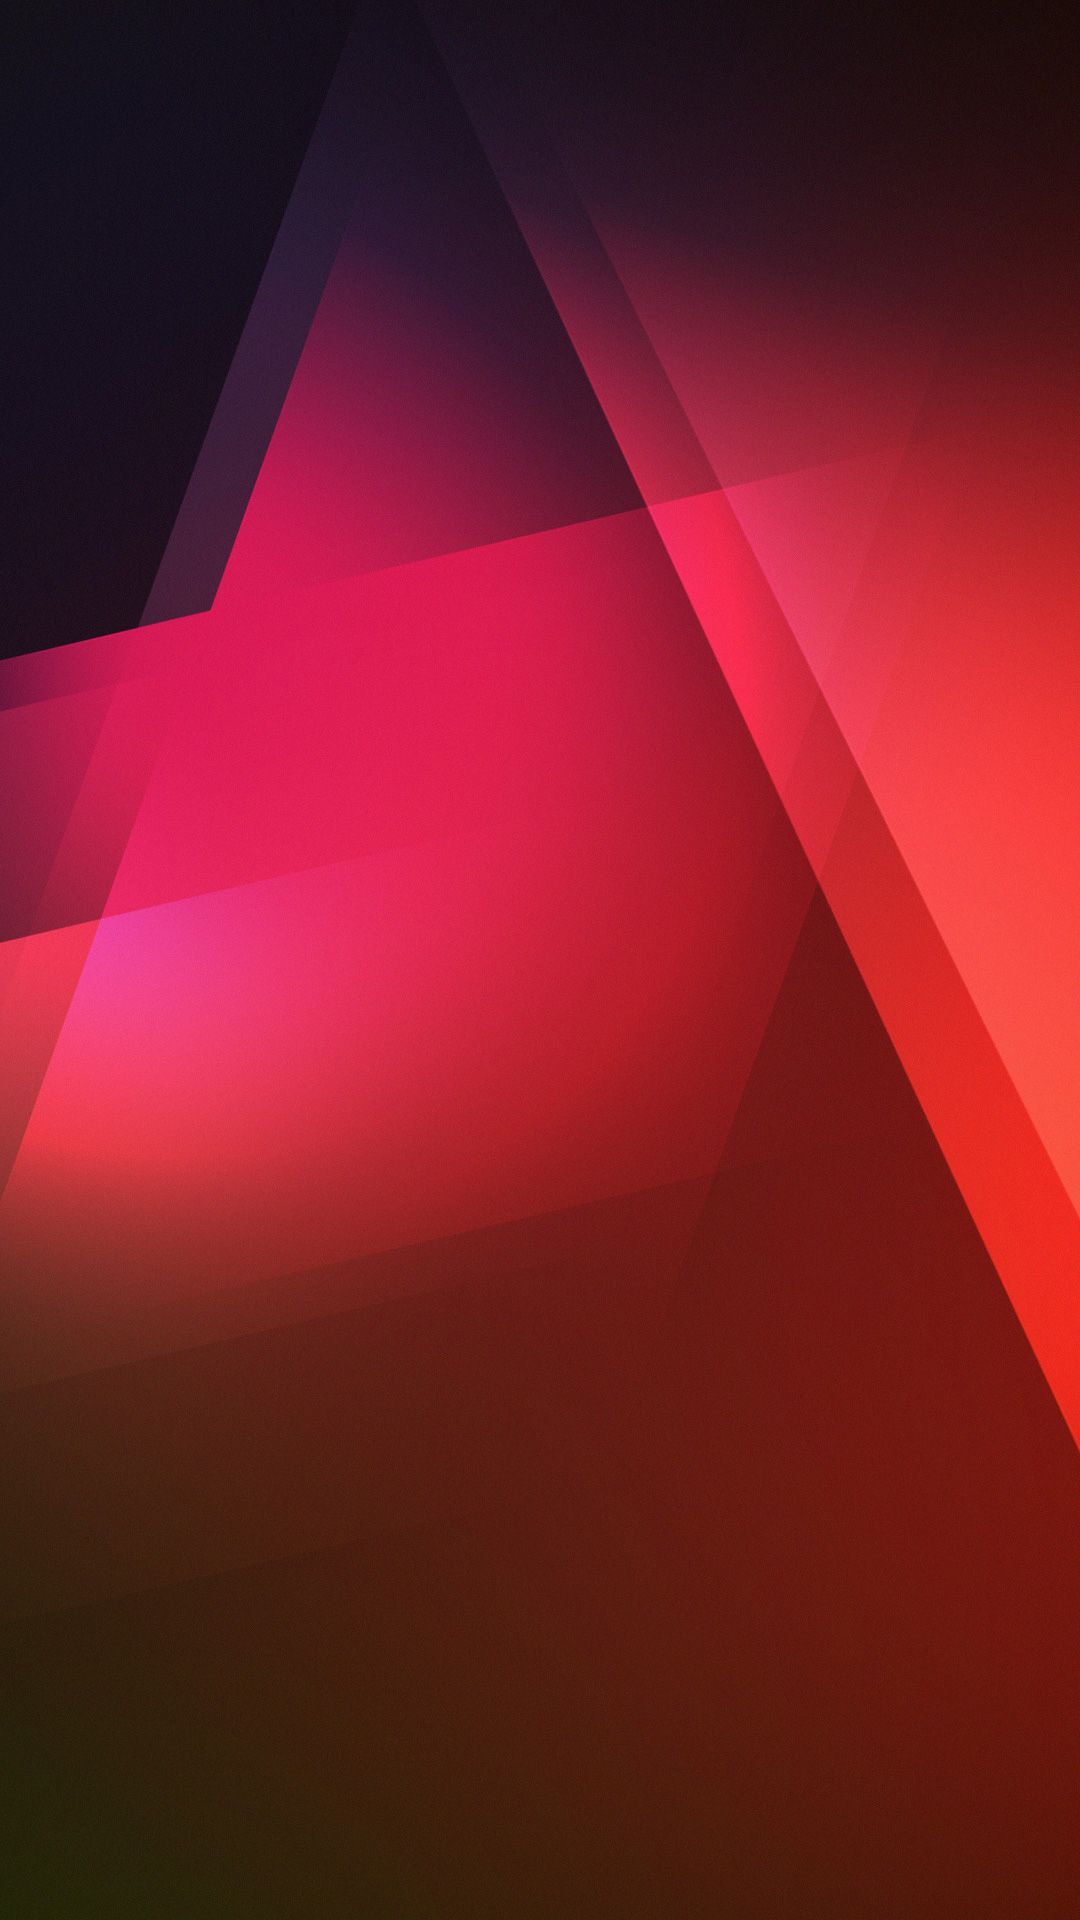 Red Triangles Gradient Shadows iPhone 6 Plus HD Wallpaper HD